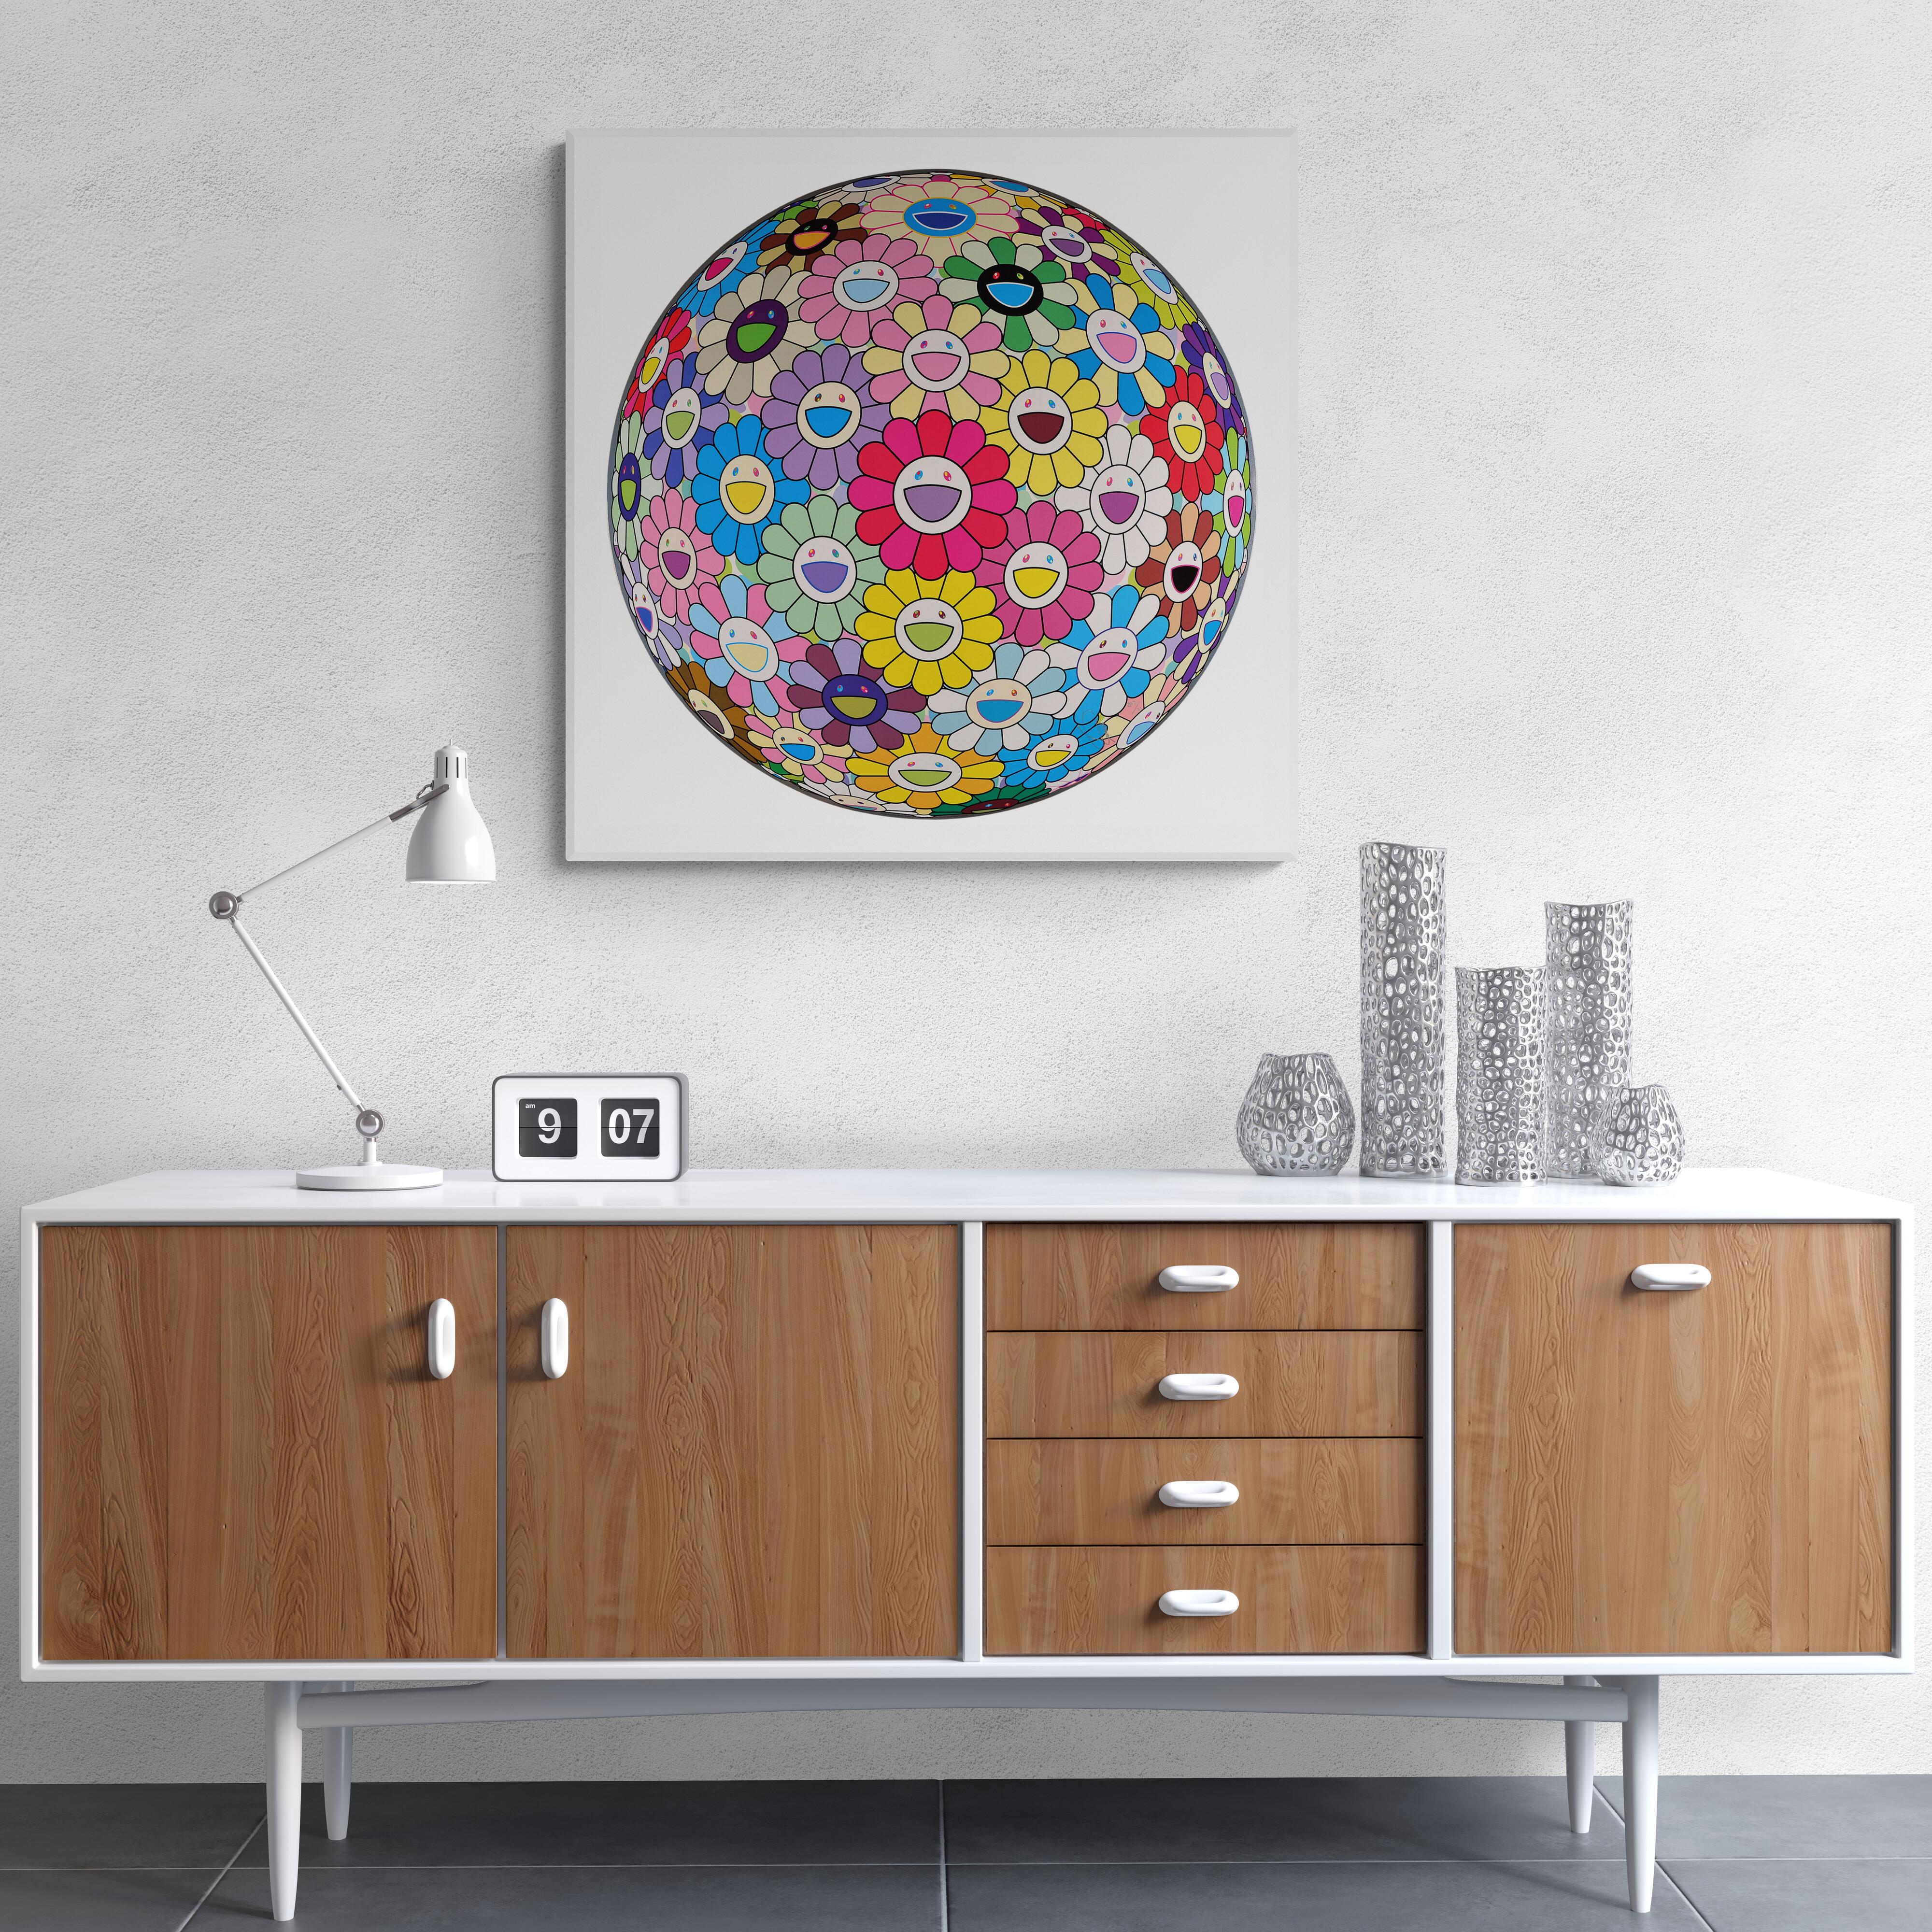 Takashi Murakami - COLORFUL, MIRACLE, SPARKLE
Date of creation: 2022
Medium: Offset lithograph with cold stamp and high gloss varnishing on paper
Edition number: 207/300
Size: 71 cm Ø
Condition: In mint conditions and never framed
Observations: